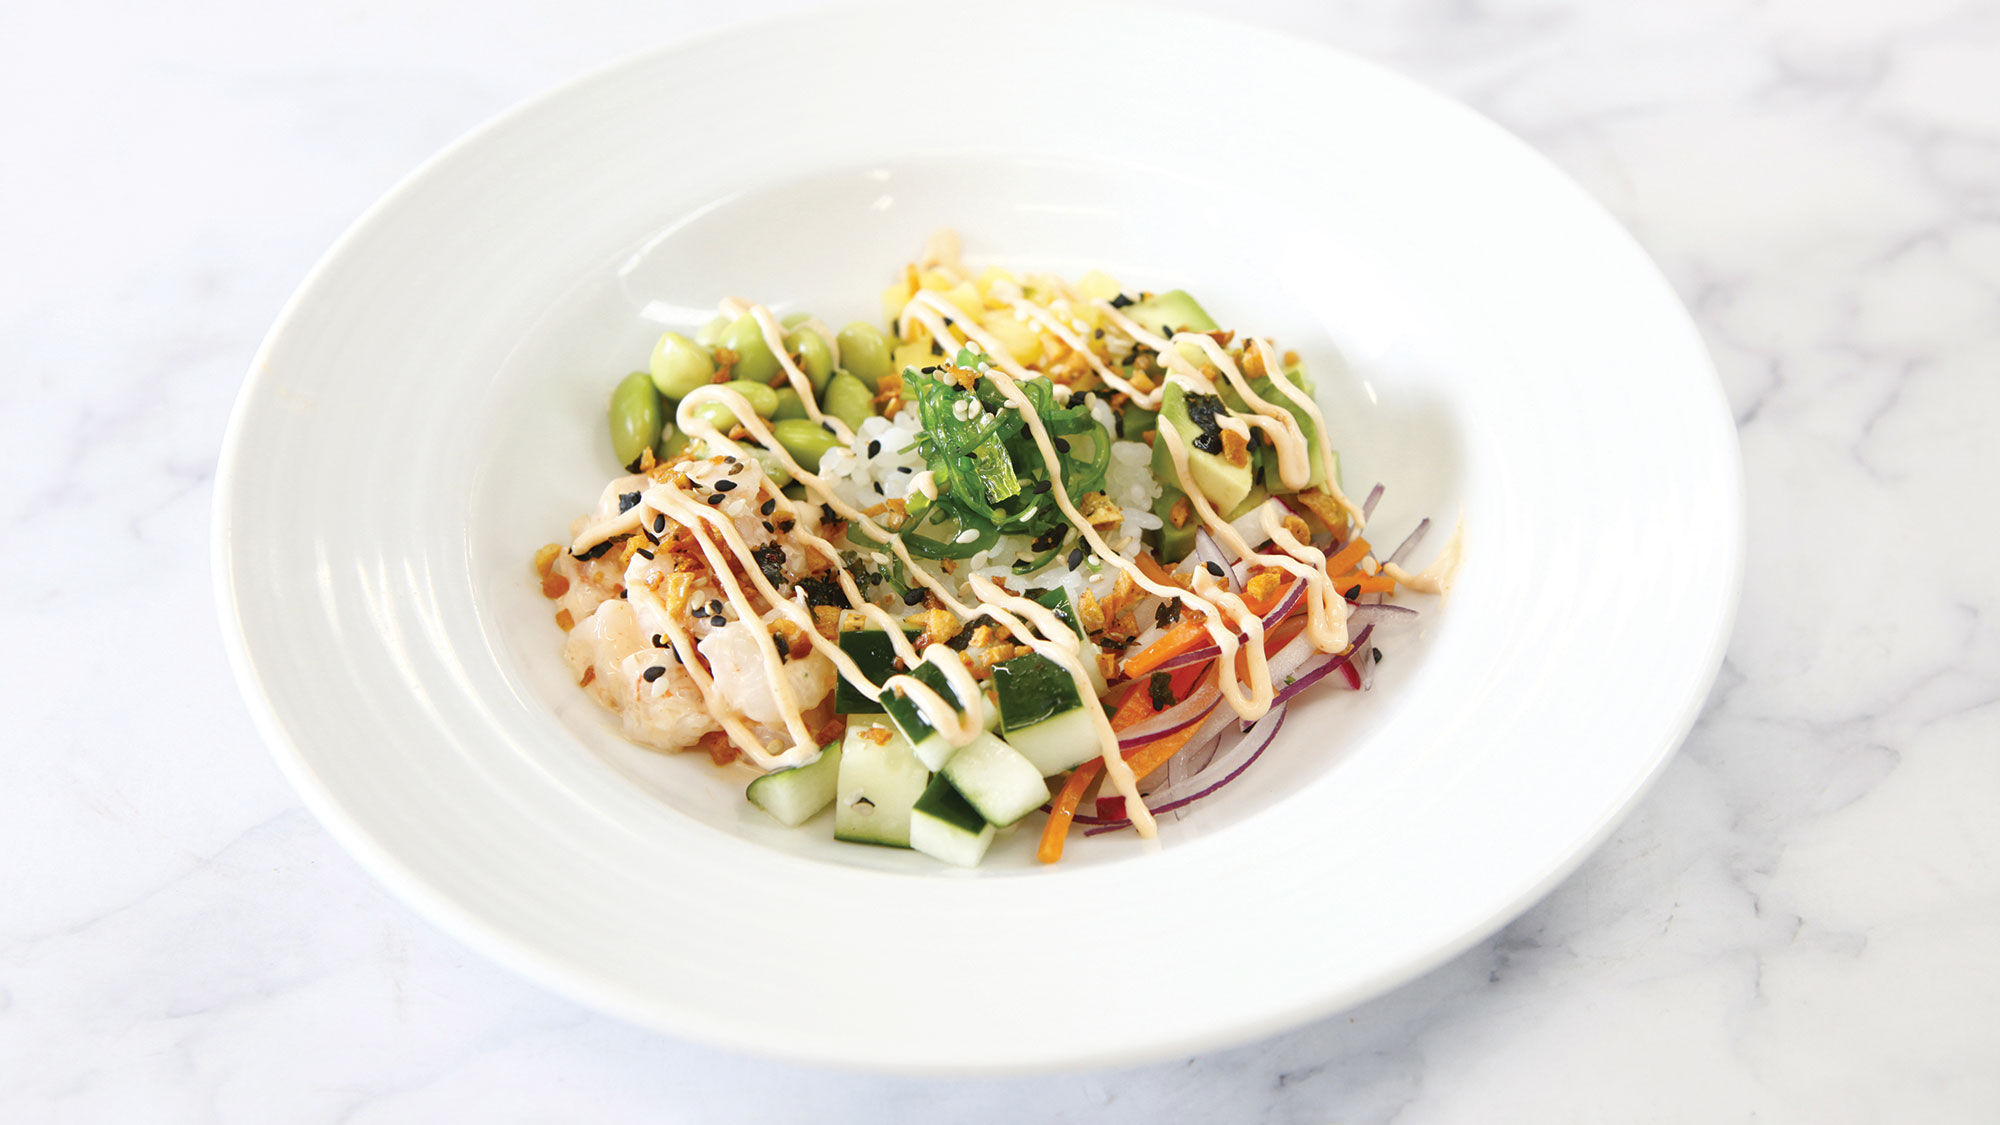 Hawaiian poke is on Carnival Cruise Line's new vegan menu and is made with plant-based salmon.